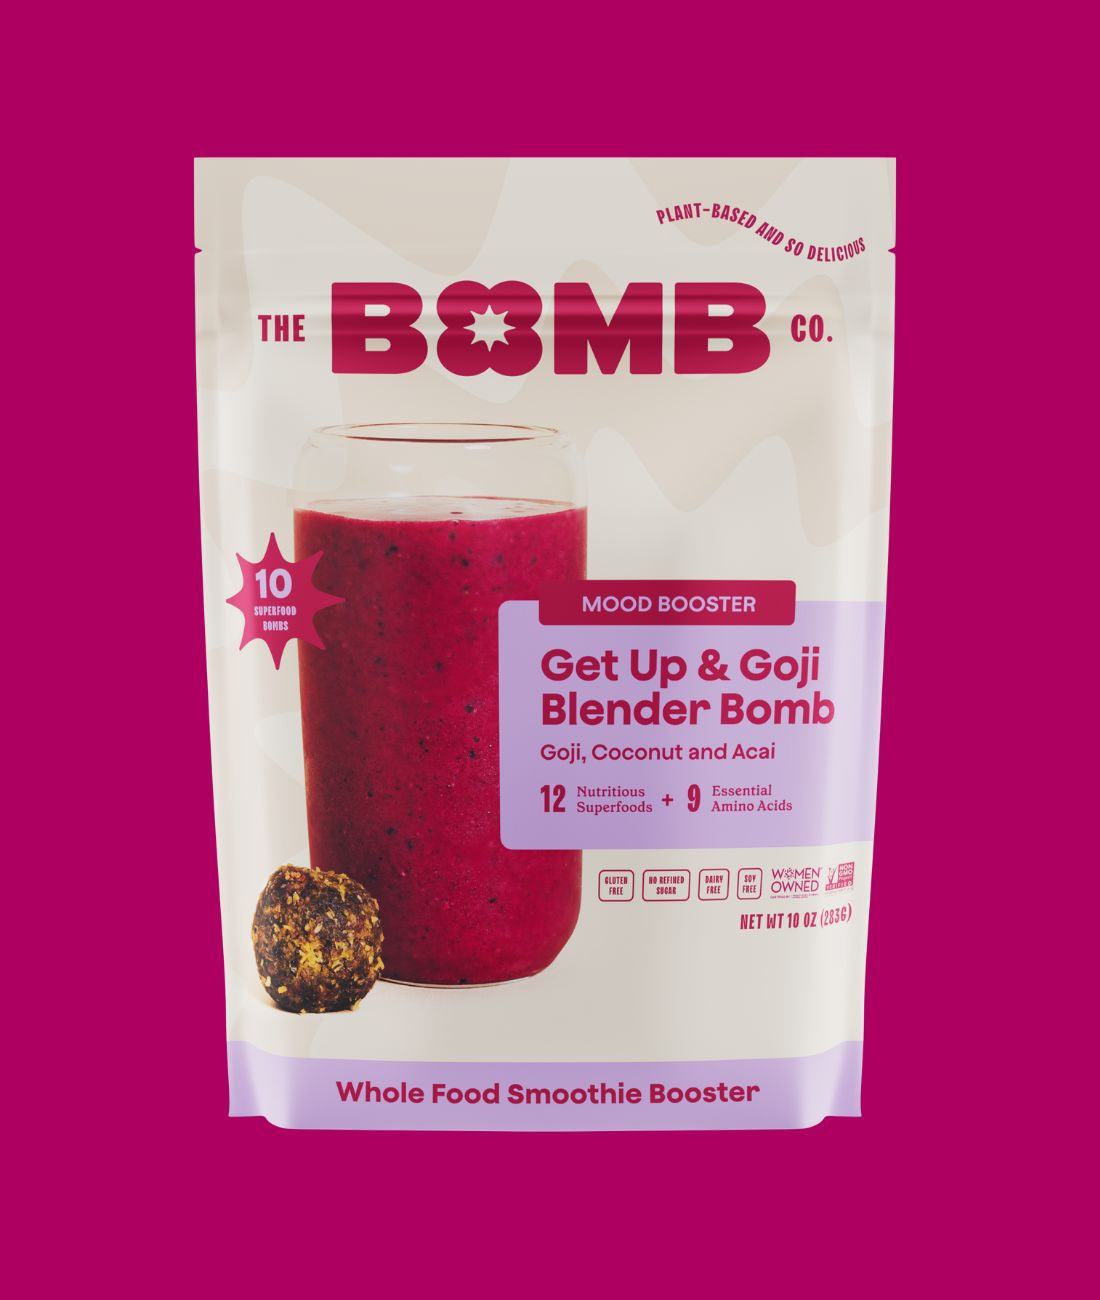 My Daily Blender Bombs Smoothie Recipe + GIVEAWAY